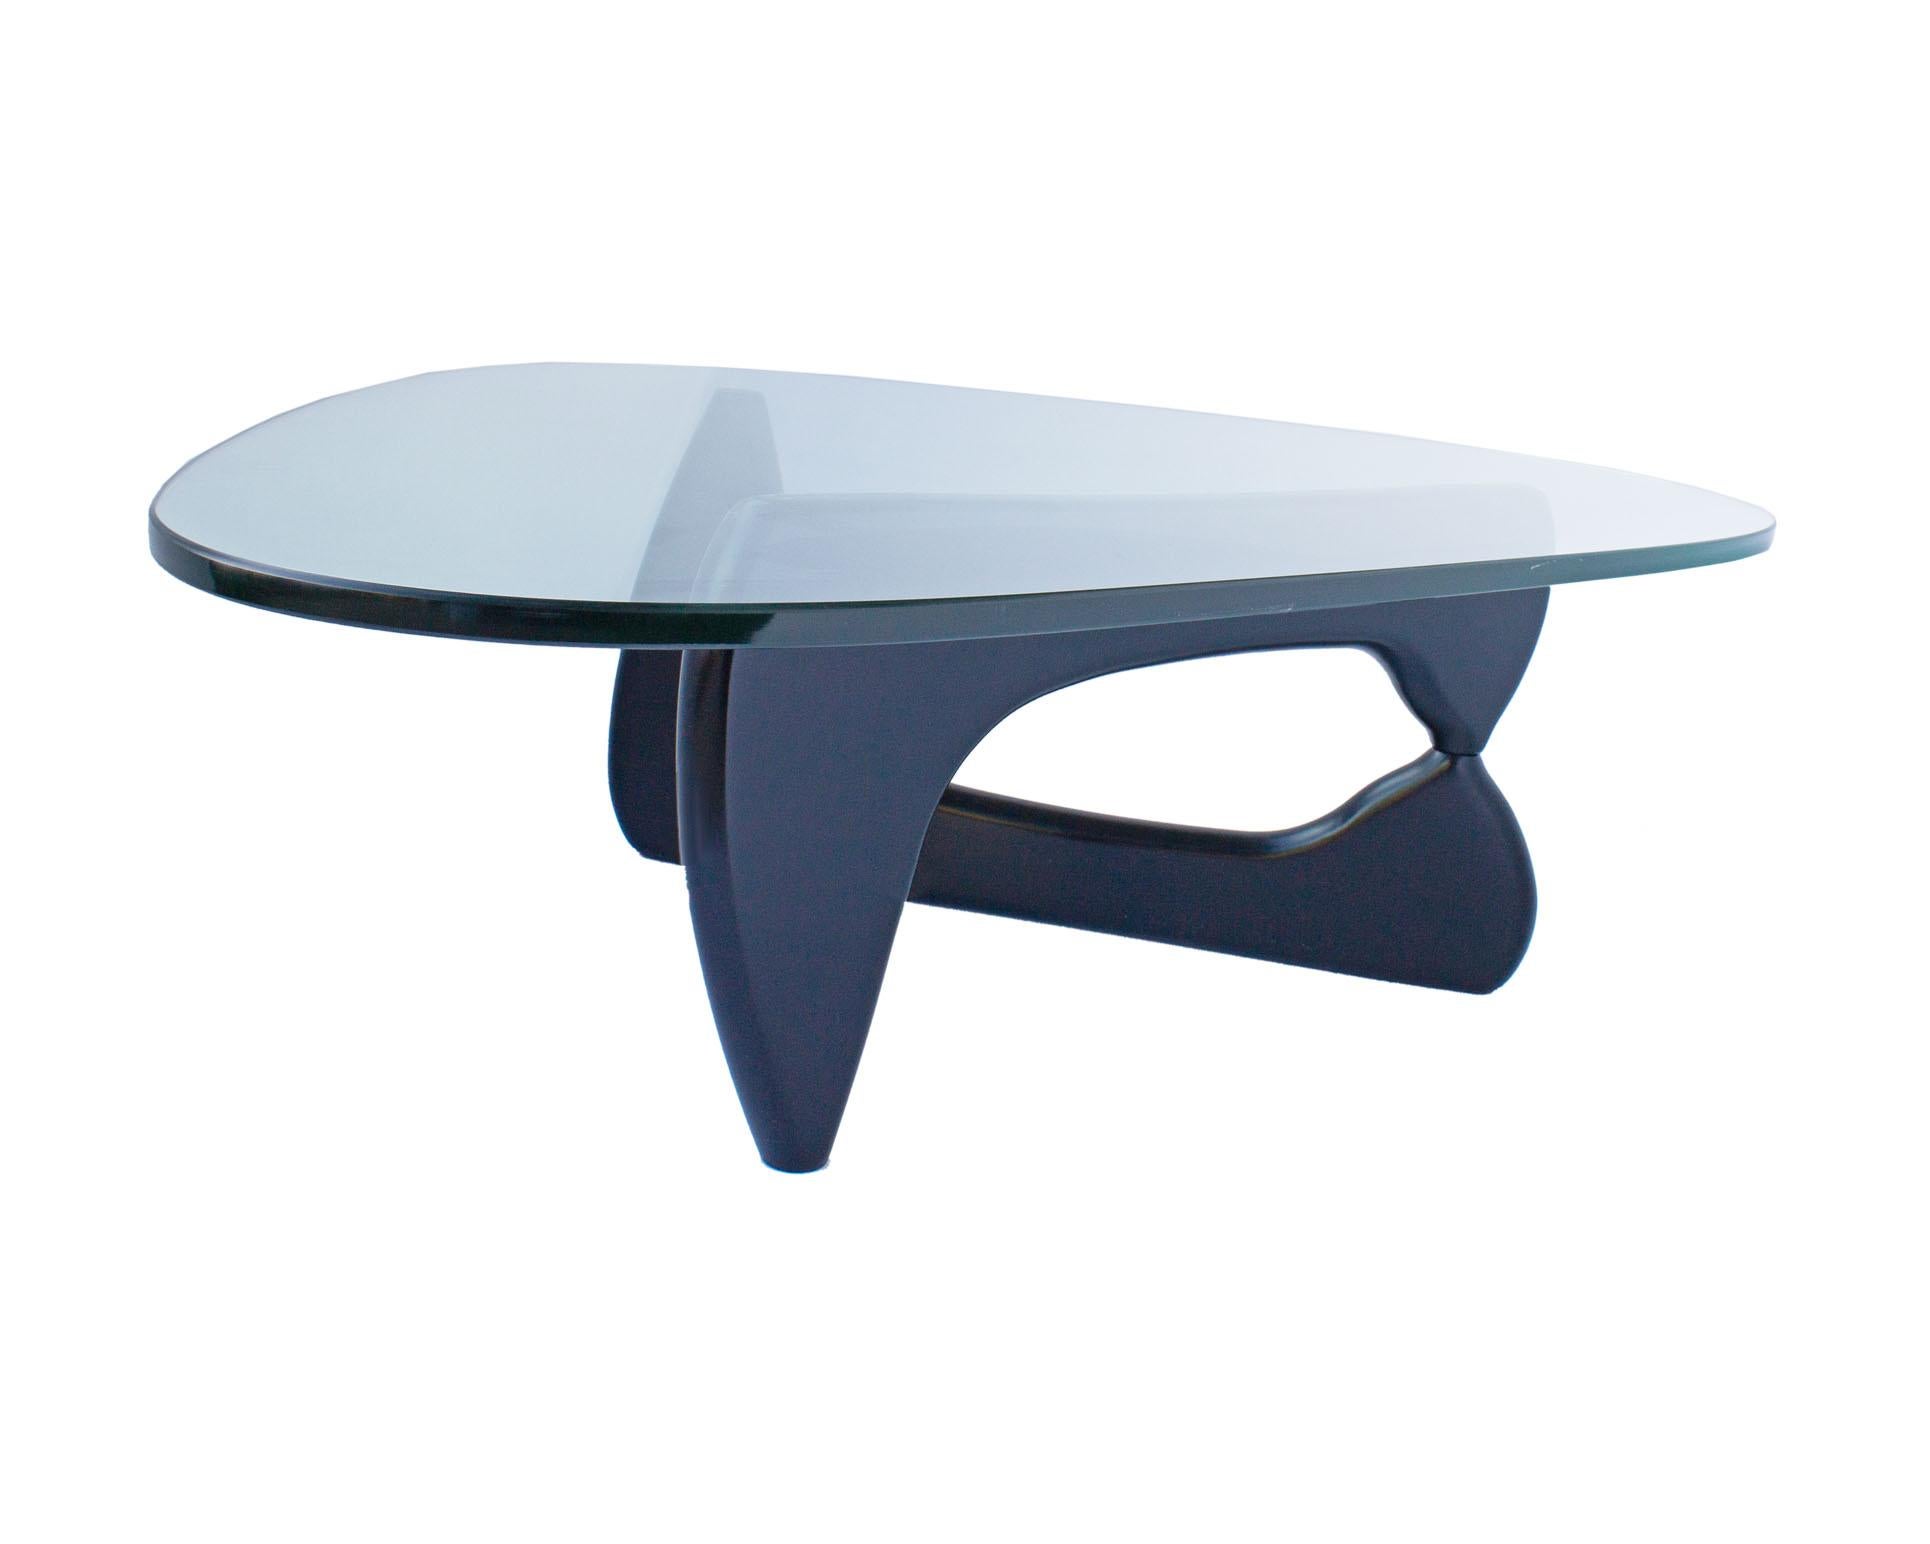 A Noguchi coffee table designed by the American designer Isamu Noguchi (1904-1988) for Herman Miller. This iconic table has a triangular glass top that rests on a black wooden base that scissors open. Originally designed in 1948, this table was